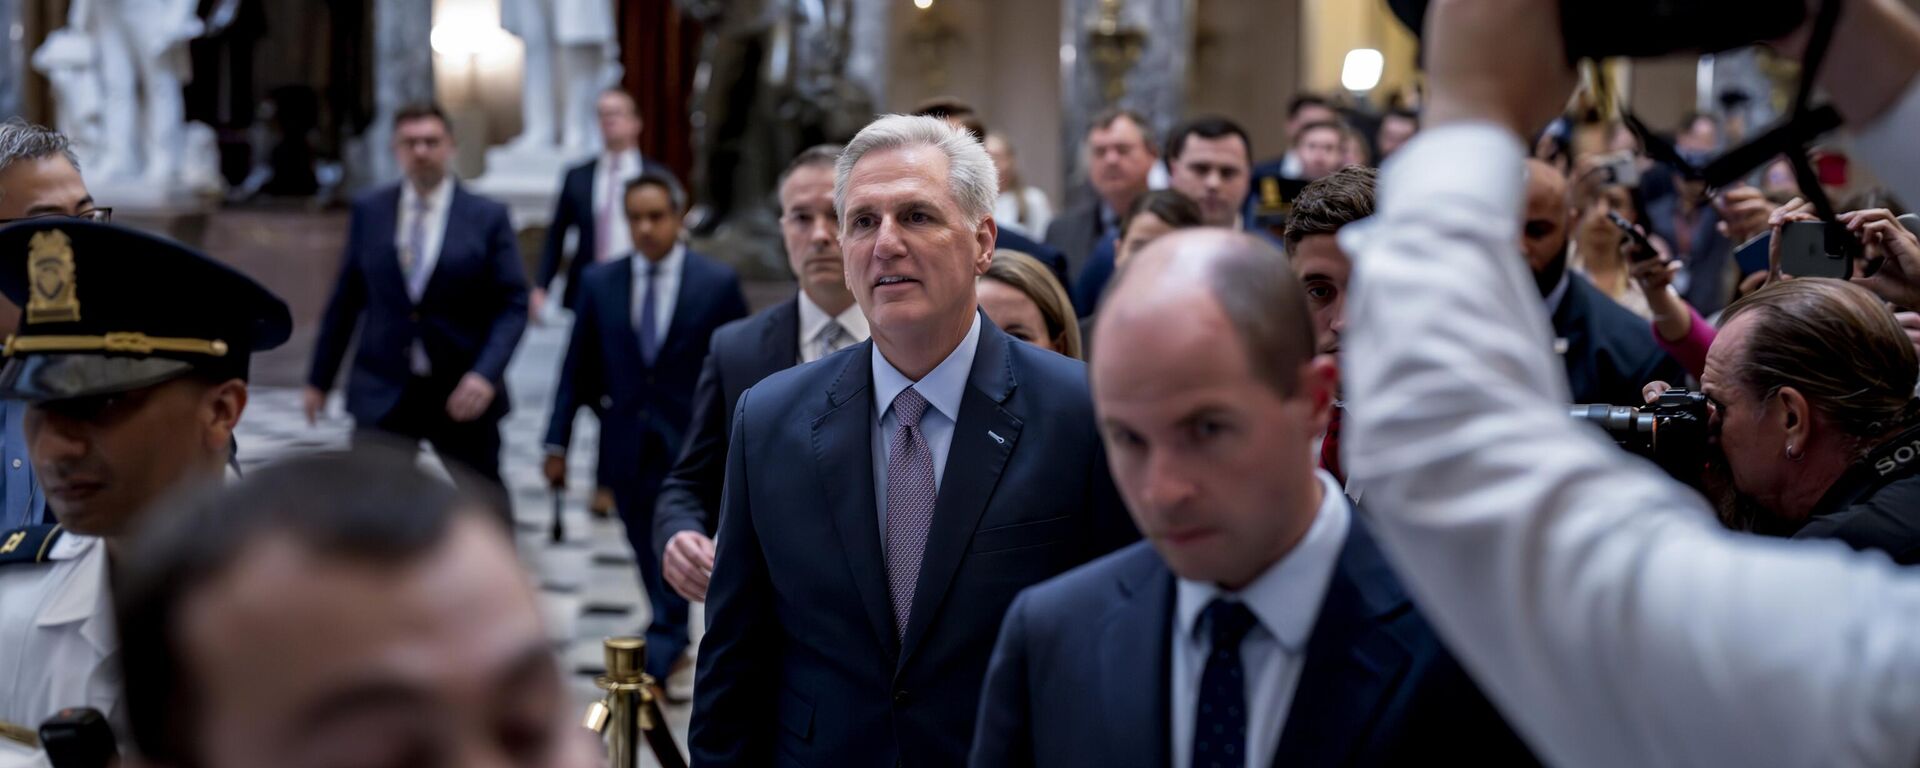 Rep. Kevin McCarthy, R-Calif., leaves the House floor after being ousted as Speaker of the House at the Capitol in Washington, Tuesday, Oct. 3, 2023.  - Sputnik International, 1920, 05.10.2023